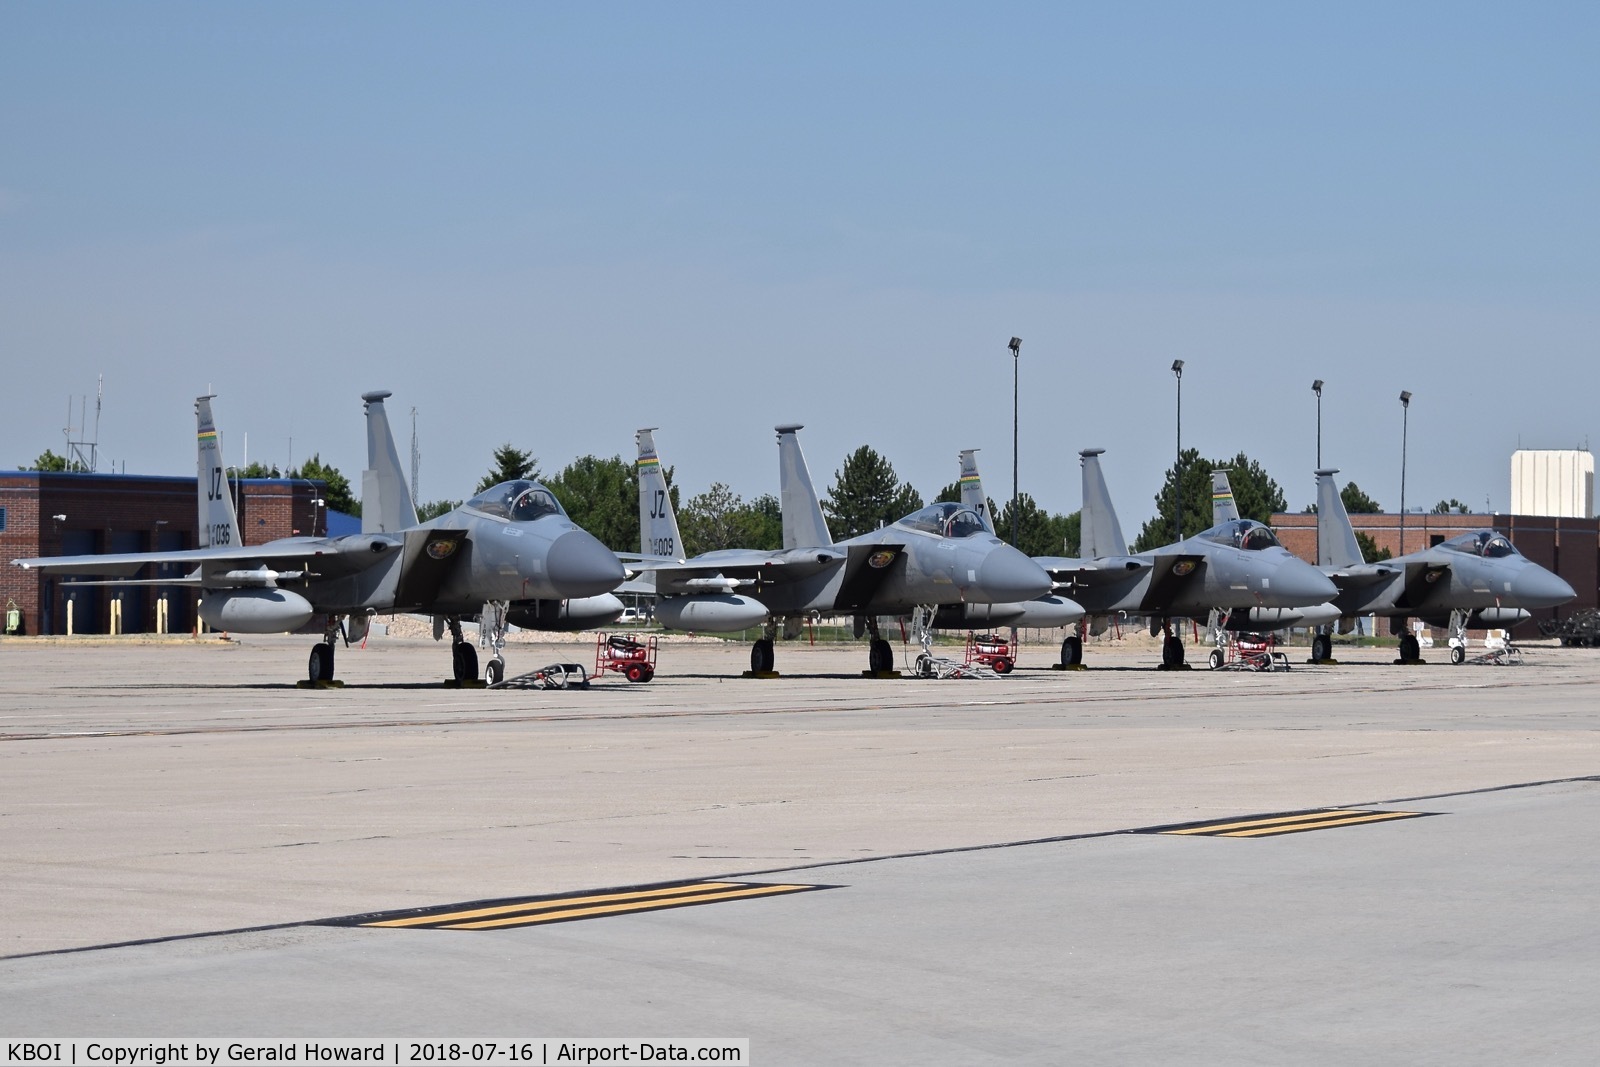 Boise Air Terminal/gowen Fld Airport (BOI) - The other 4 of 8 F-15C fighters from the 122nd Fighter Sq. 